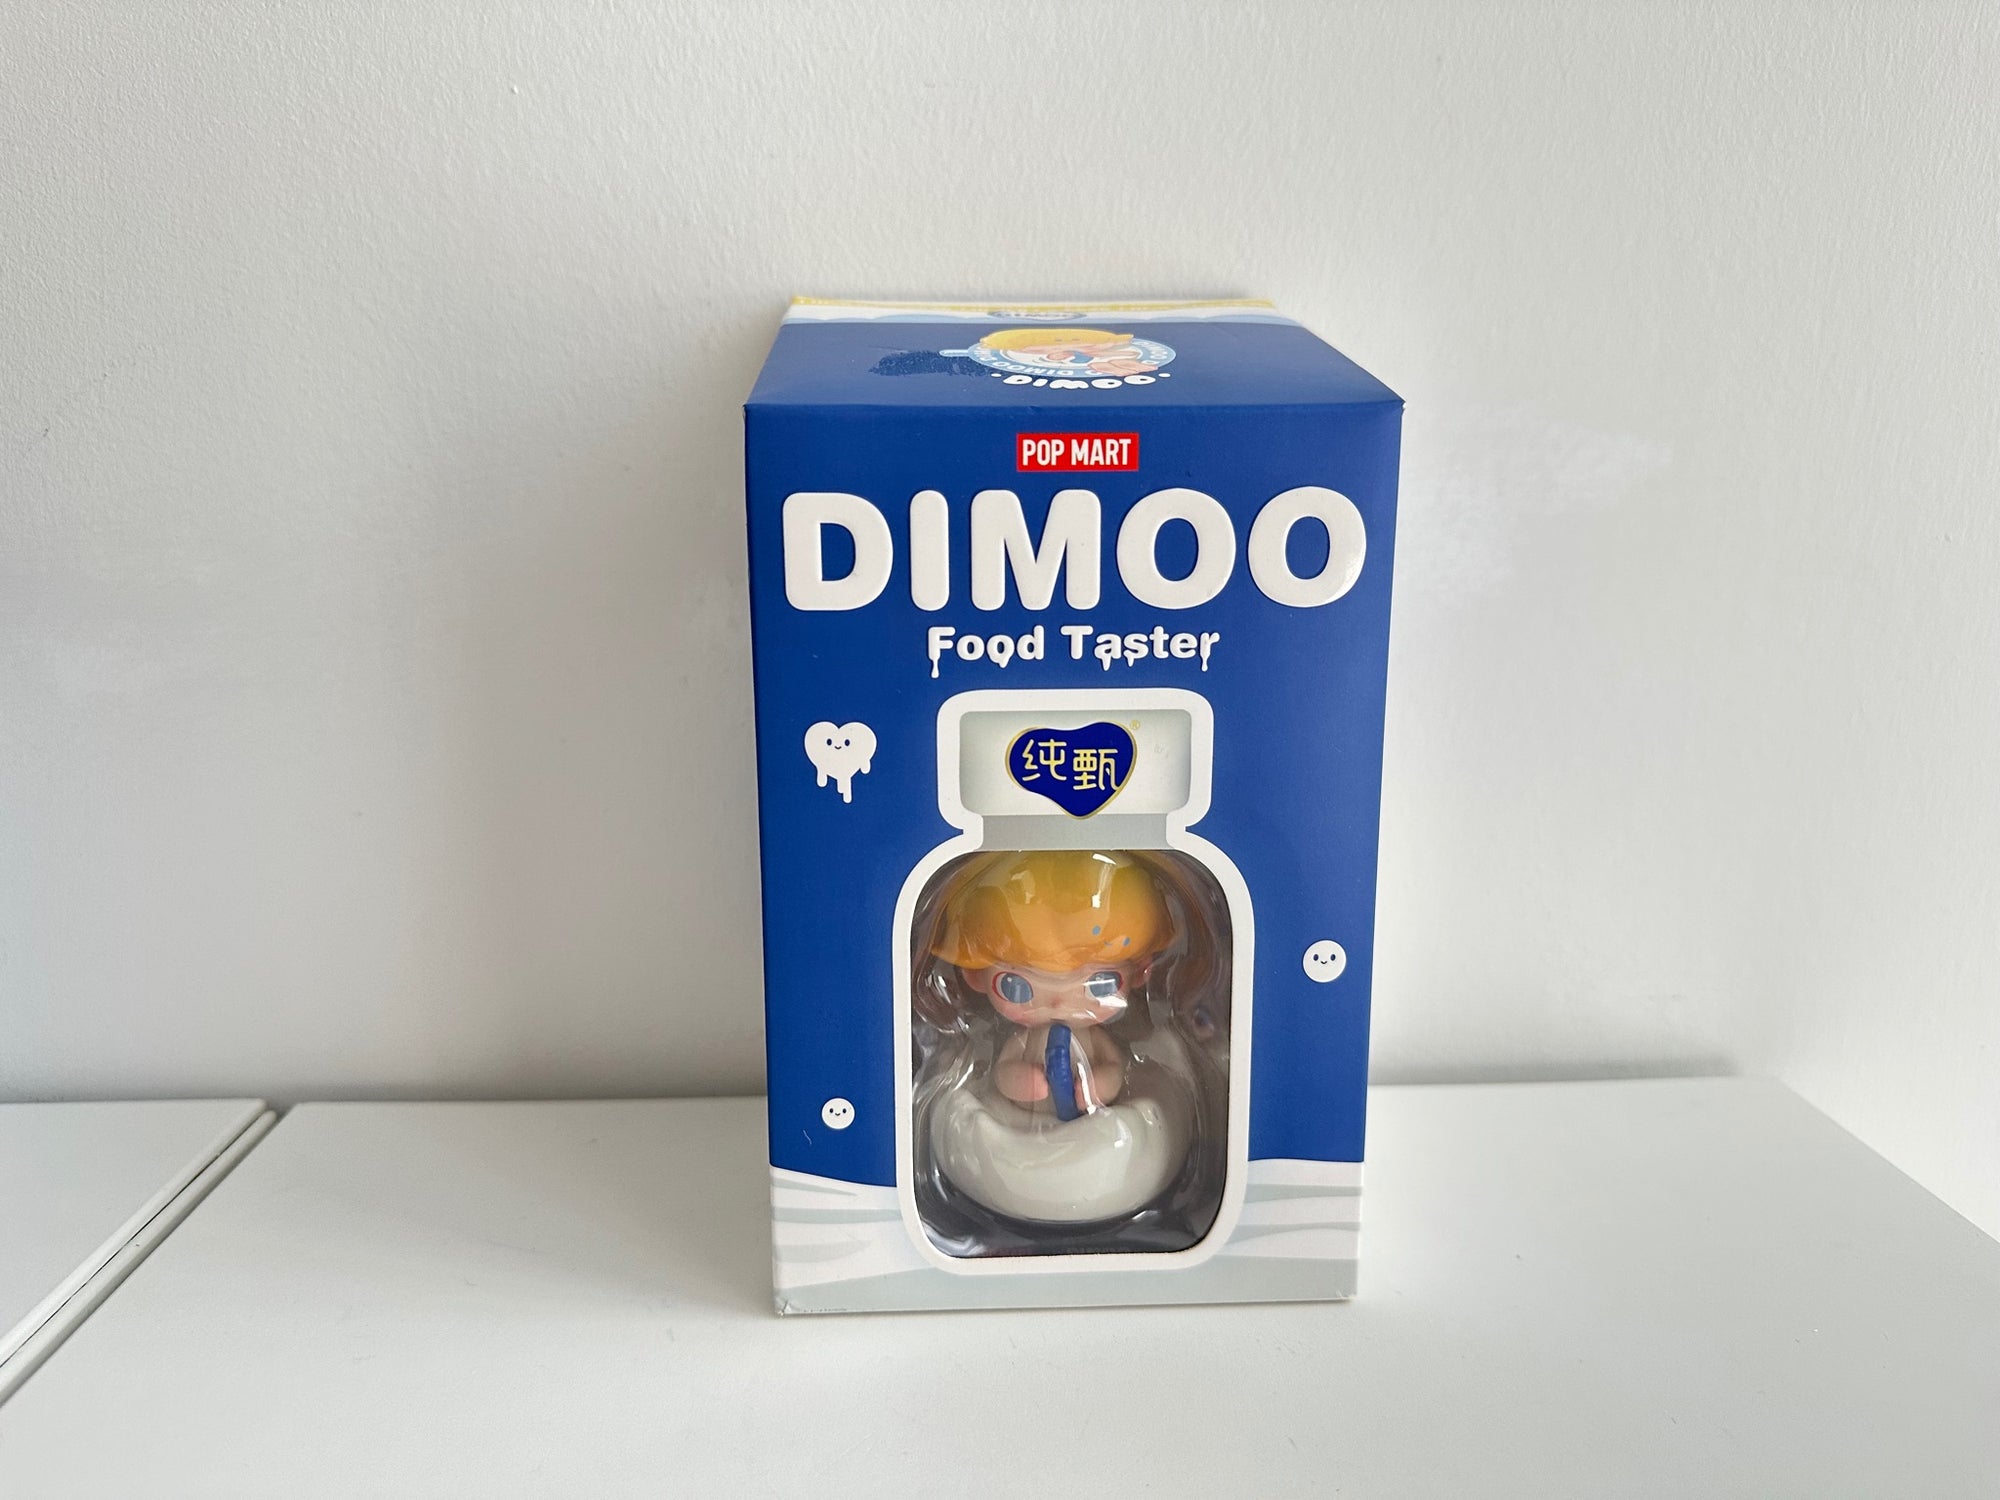 Dimoo Food Taster (LIMITED) by POP MART - 1